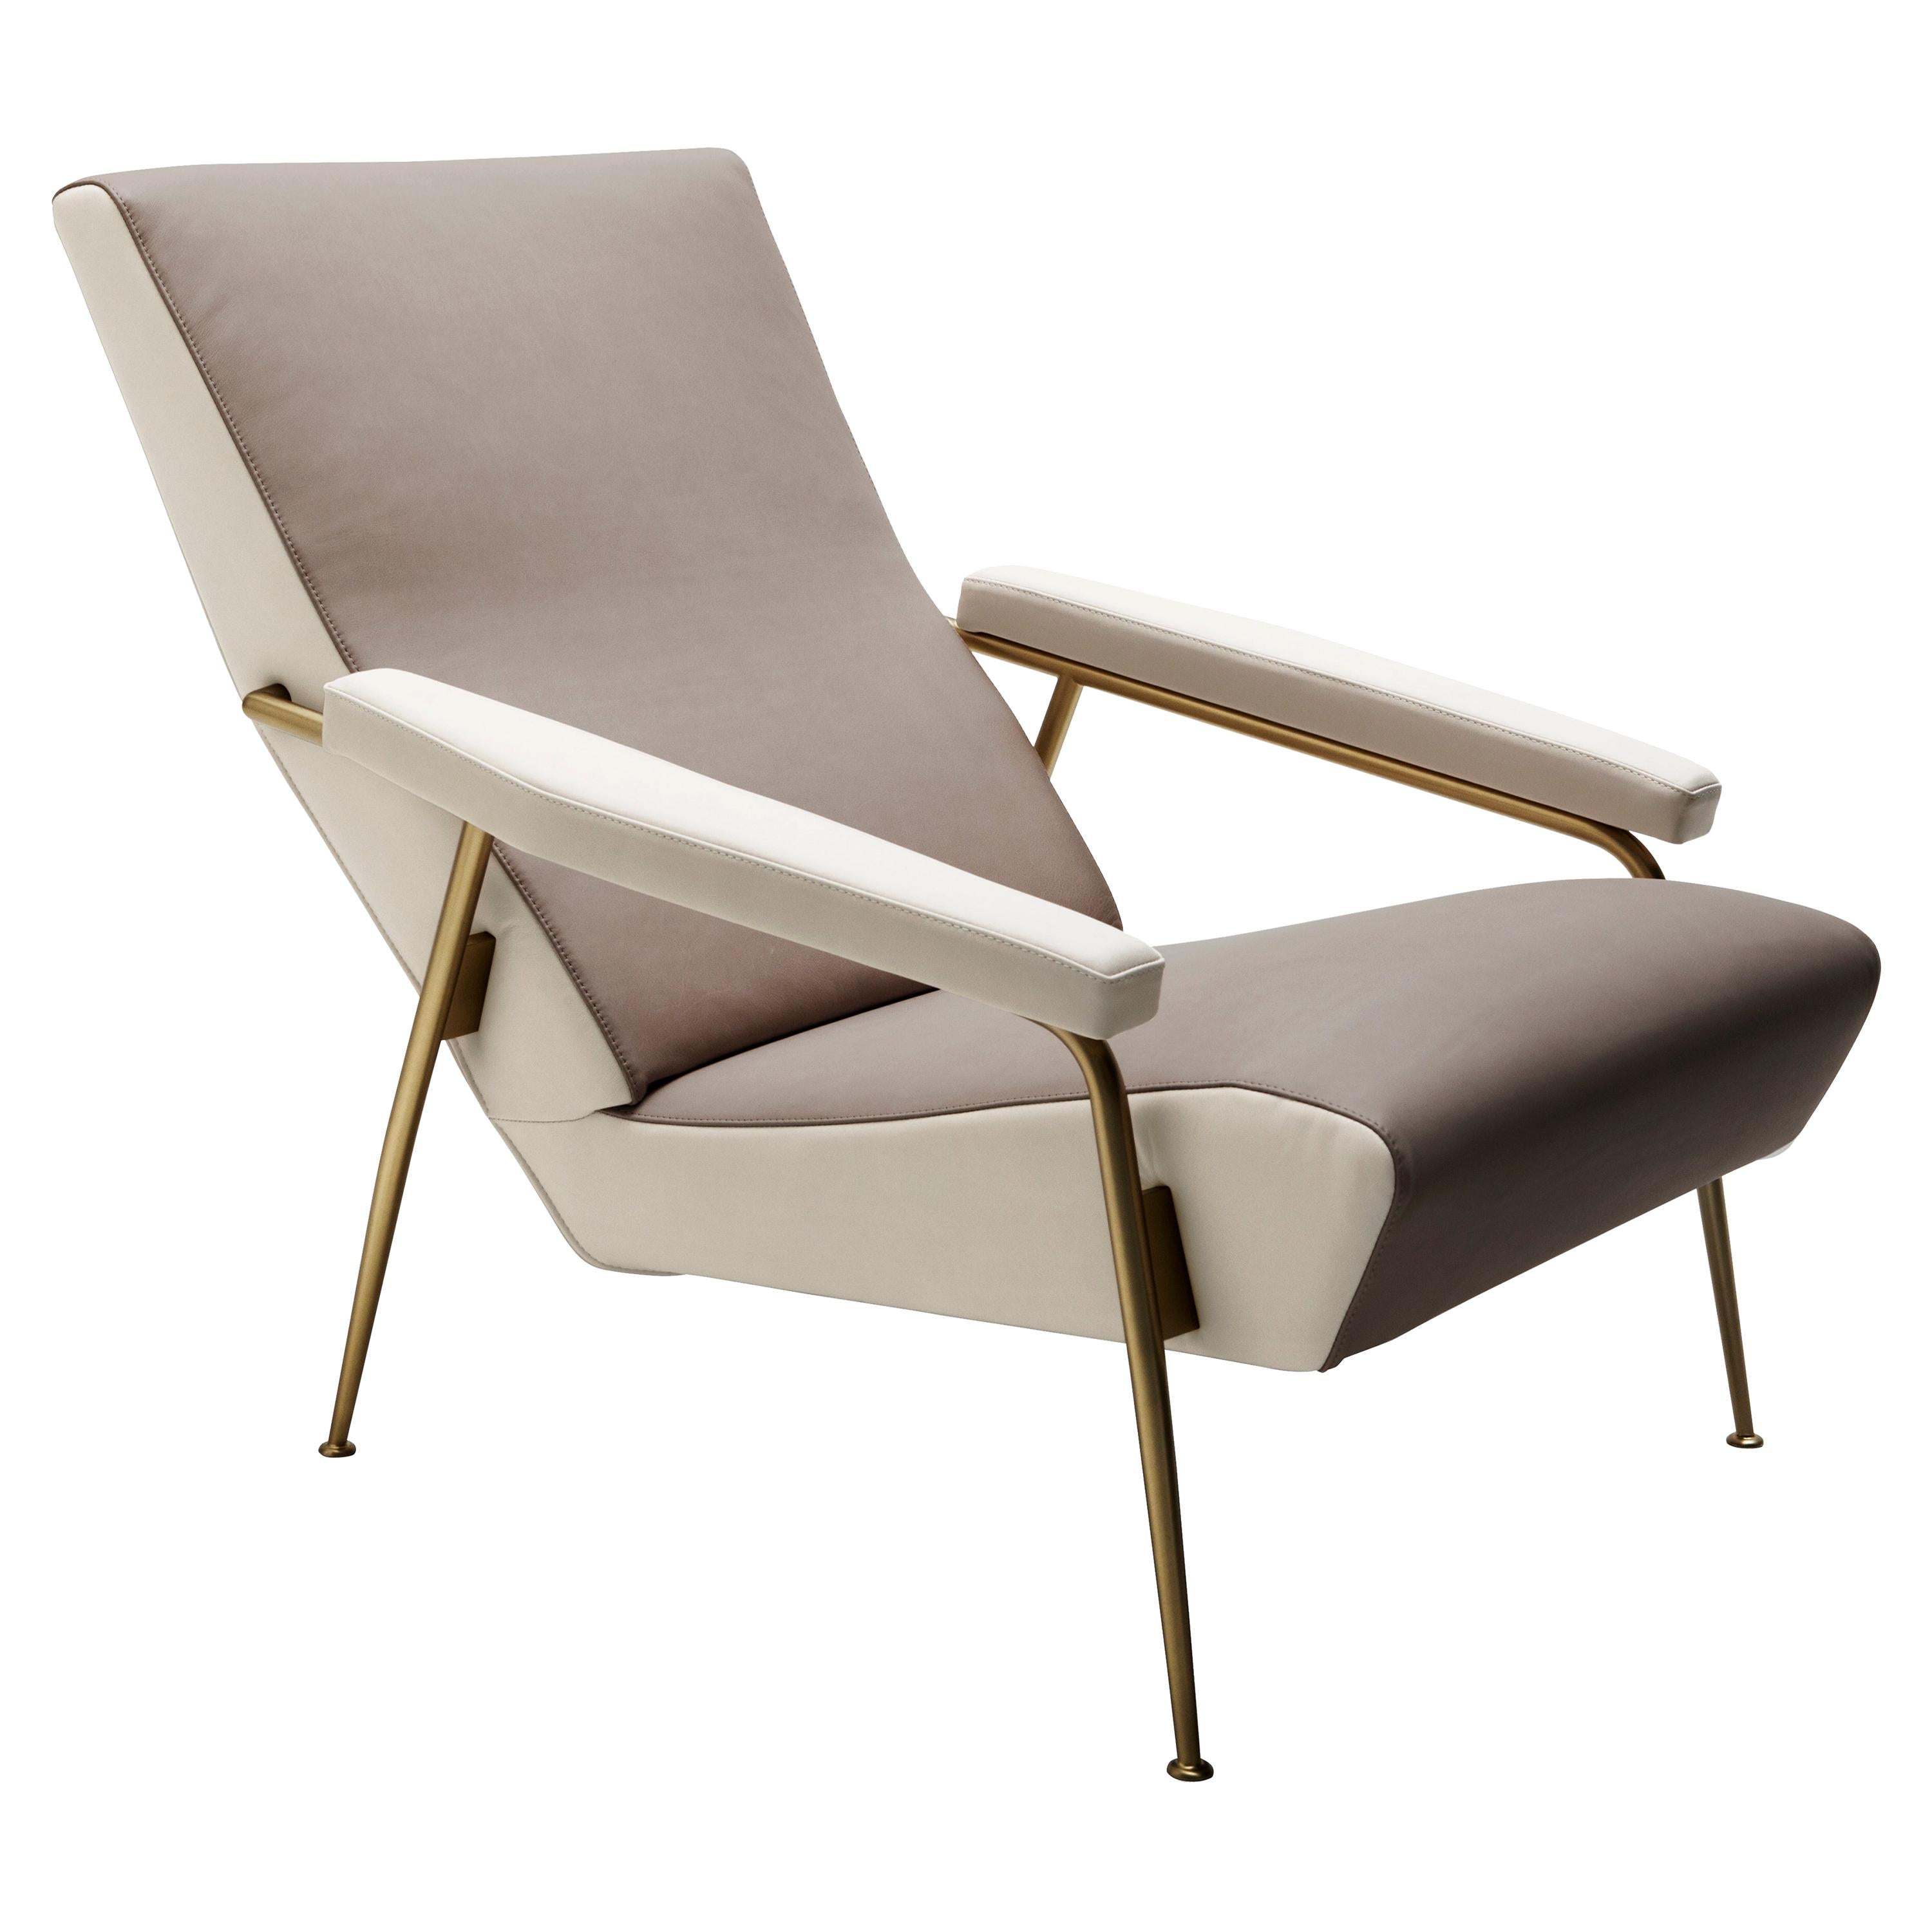 For Sale: Beige (S1211-1222_Paper White / Sand) Armchair in Leather and Steel Molteni&C by Gio Ponti - D.153.1 -made in Italy